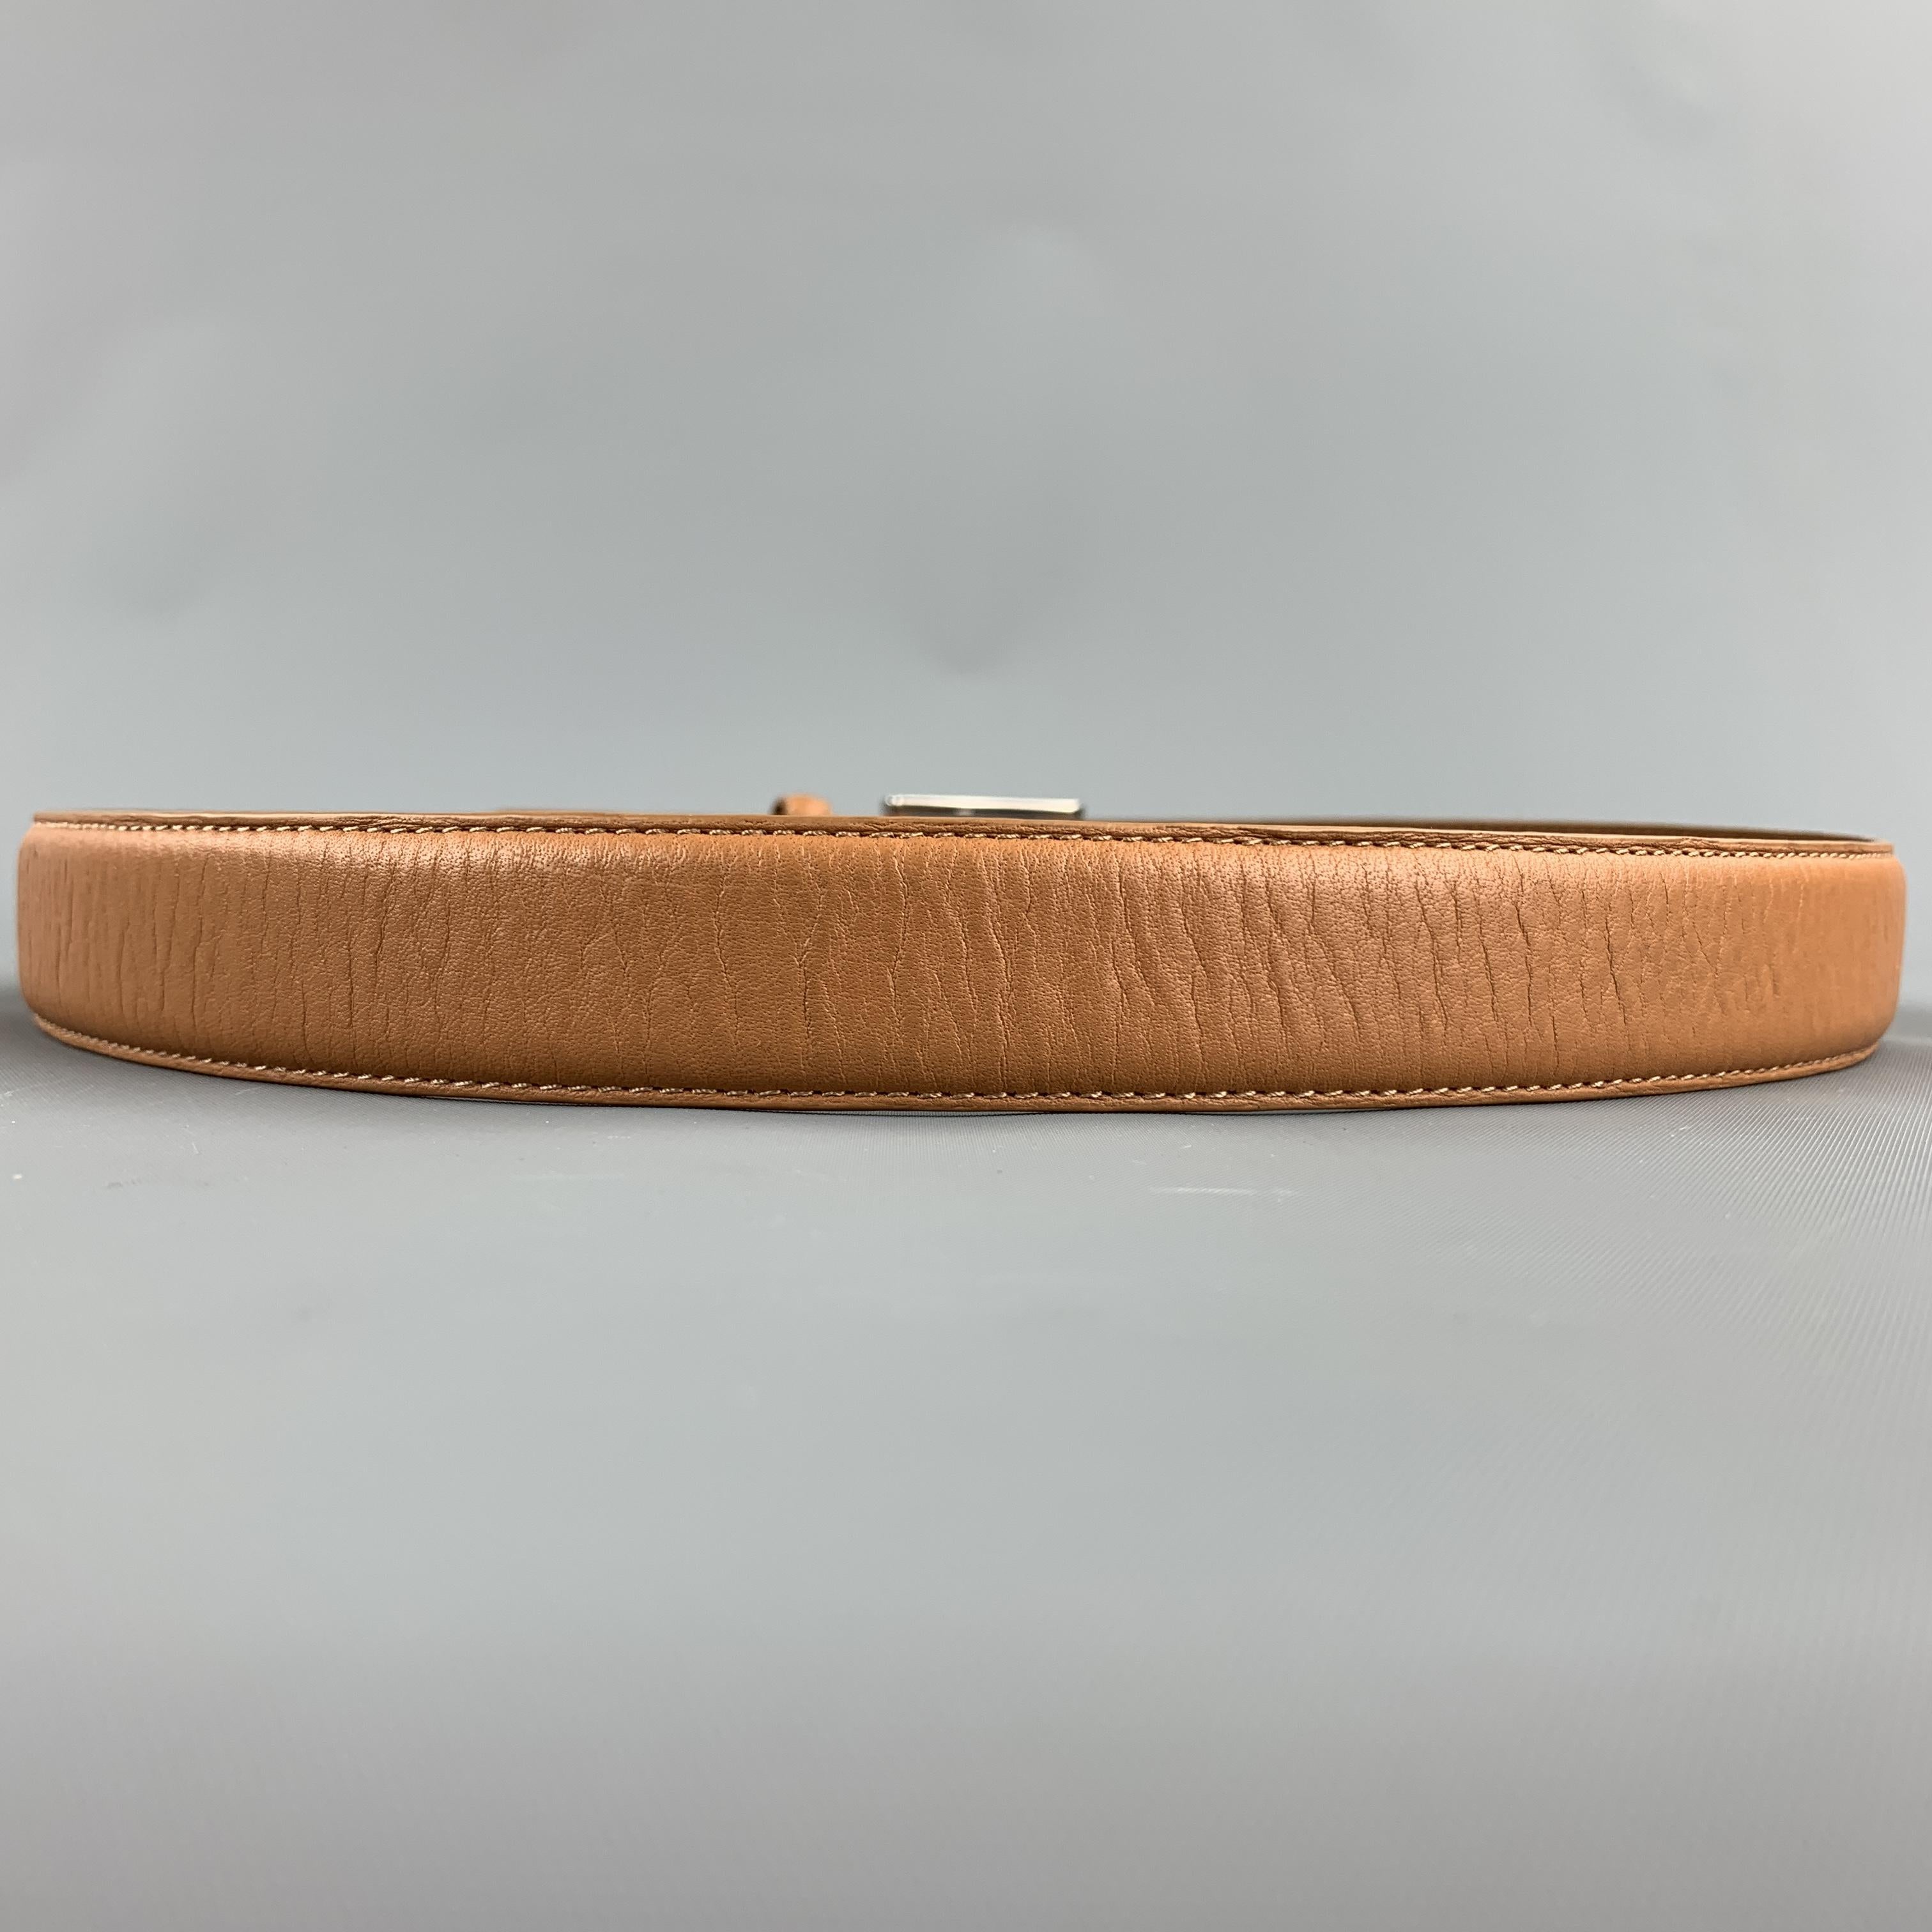 NEIMAN MARCUS belt comes in a tan leather featuring a silver tone buckle.

Good Pre-Owned Condition.
Marked: 32

Length: 39 in. 
Width: 1 in. 
Min Fit: 31.5 in. 
Max Fit: 35.5 in. 